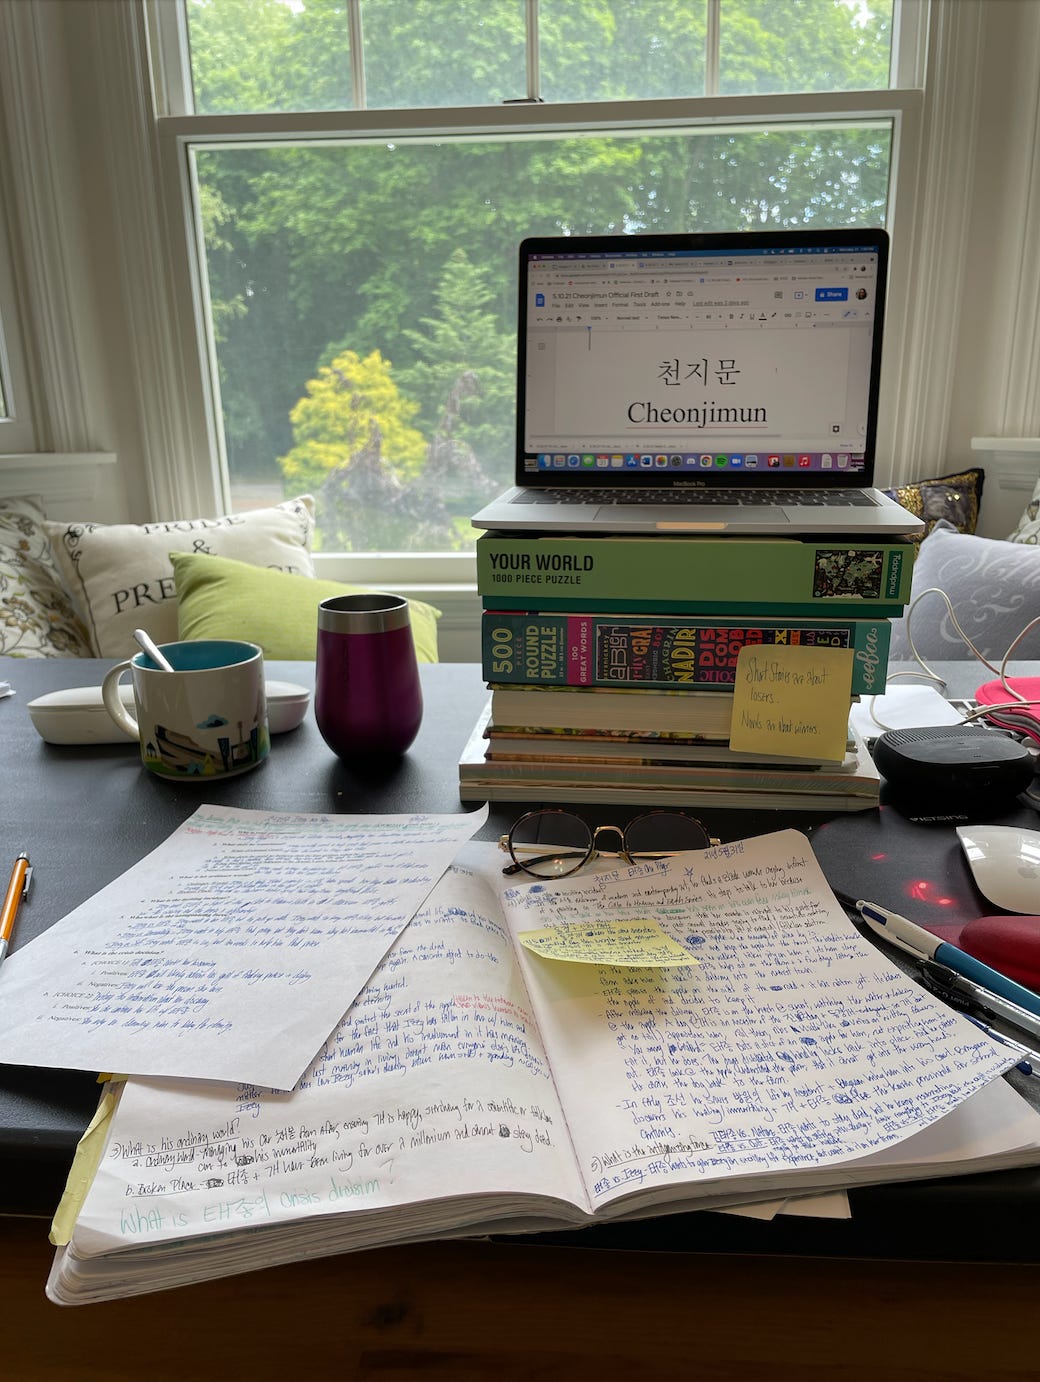 A photo of Kat’s opened notebooks with her messy handwriting and her laptop opened to her novel’s Word doc. Her novel’s title, CheonJiMun is visible on the screen.